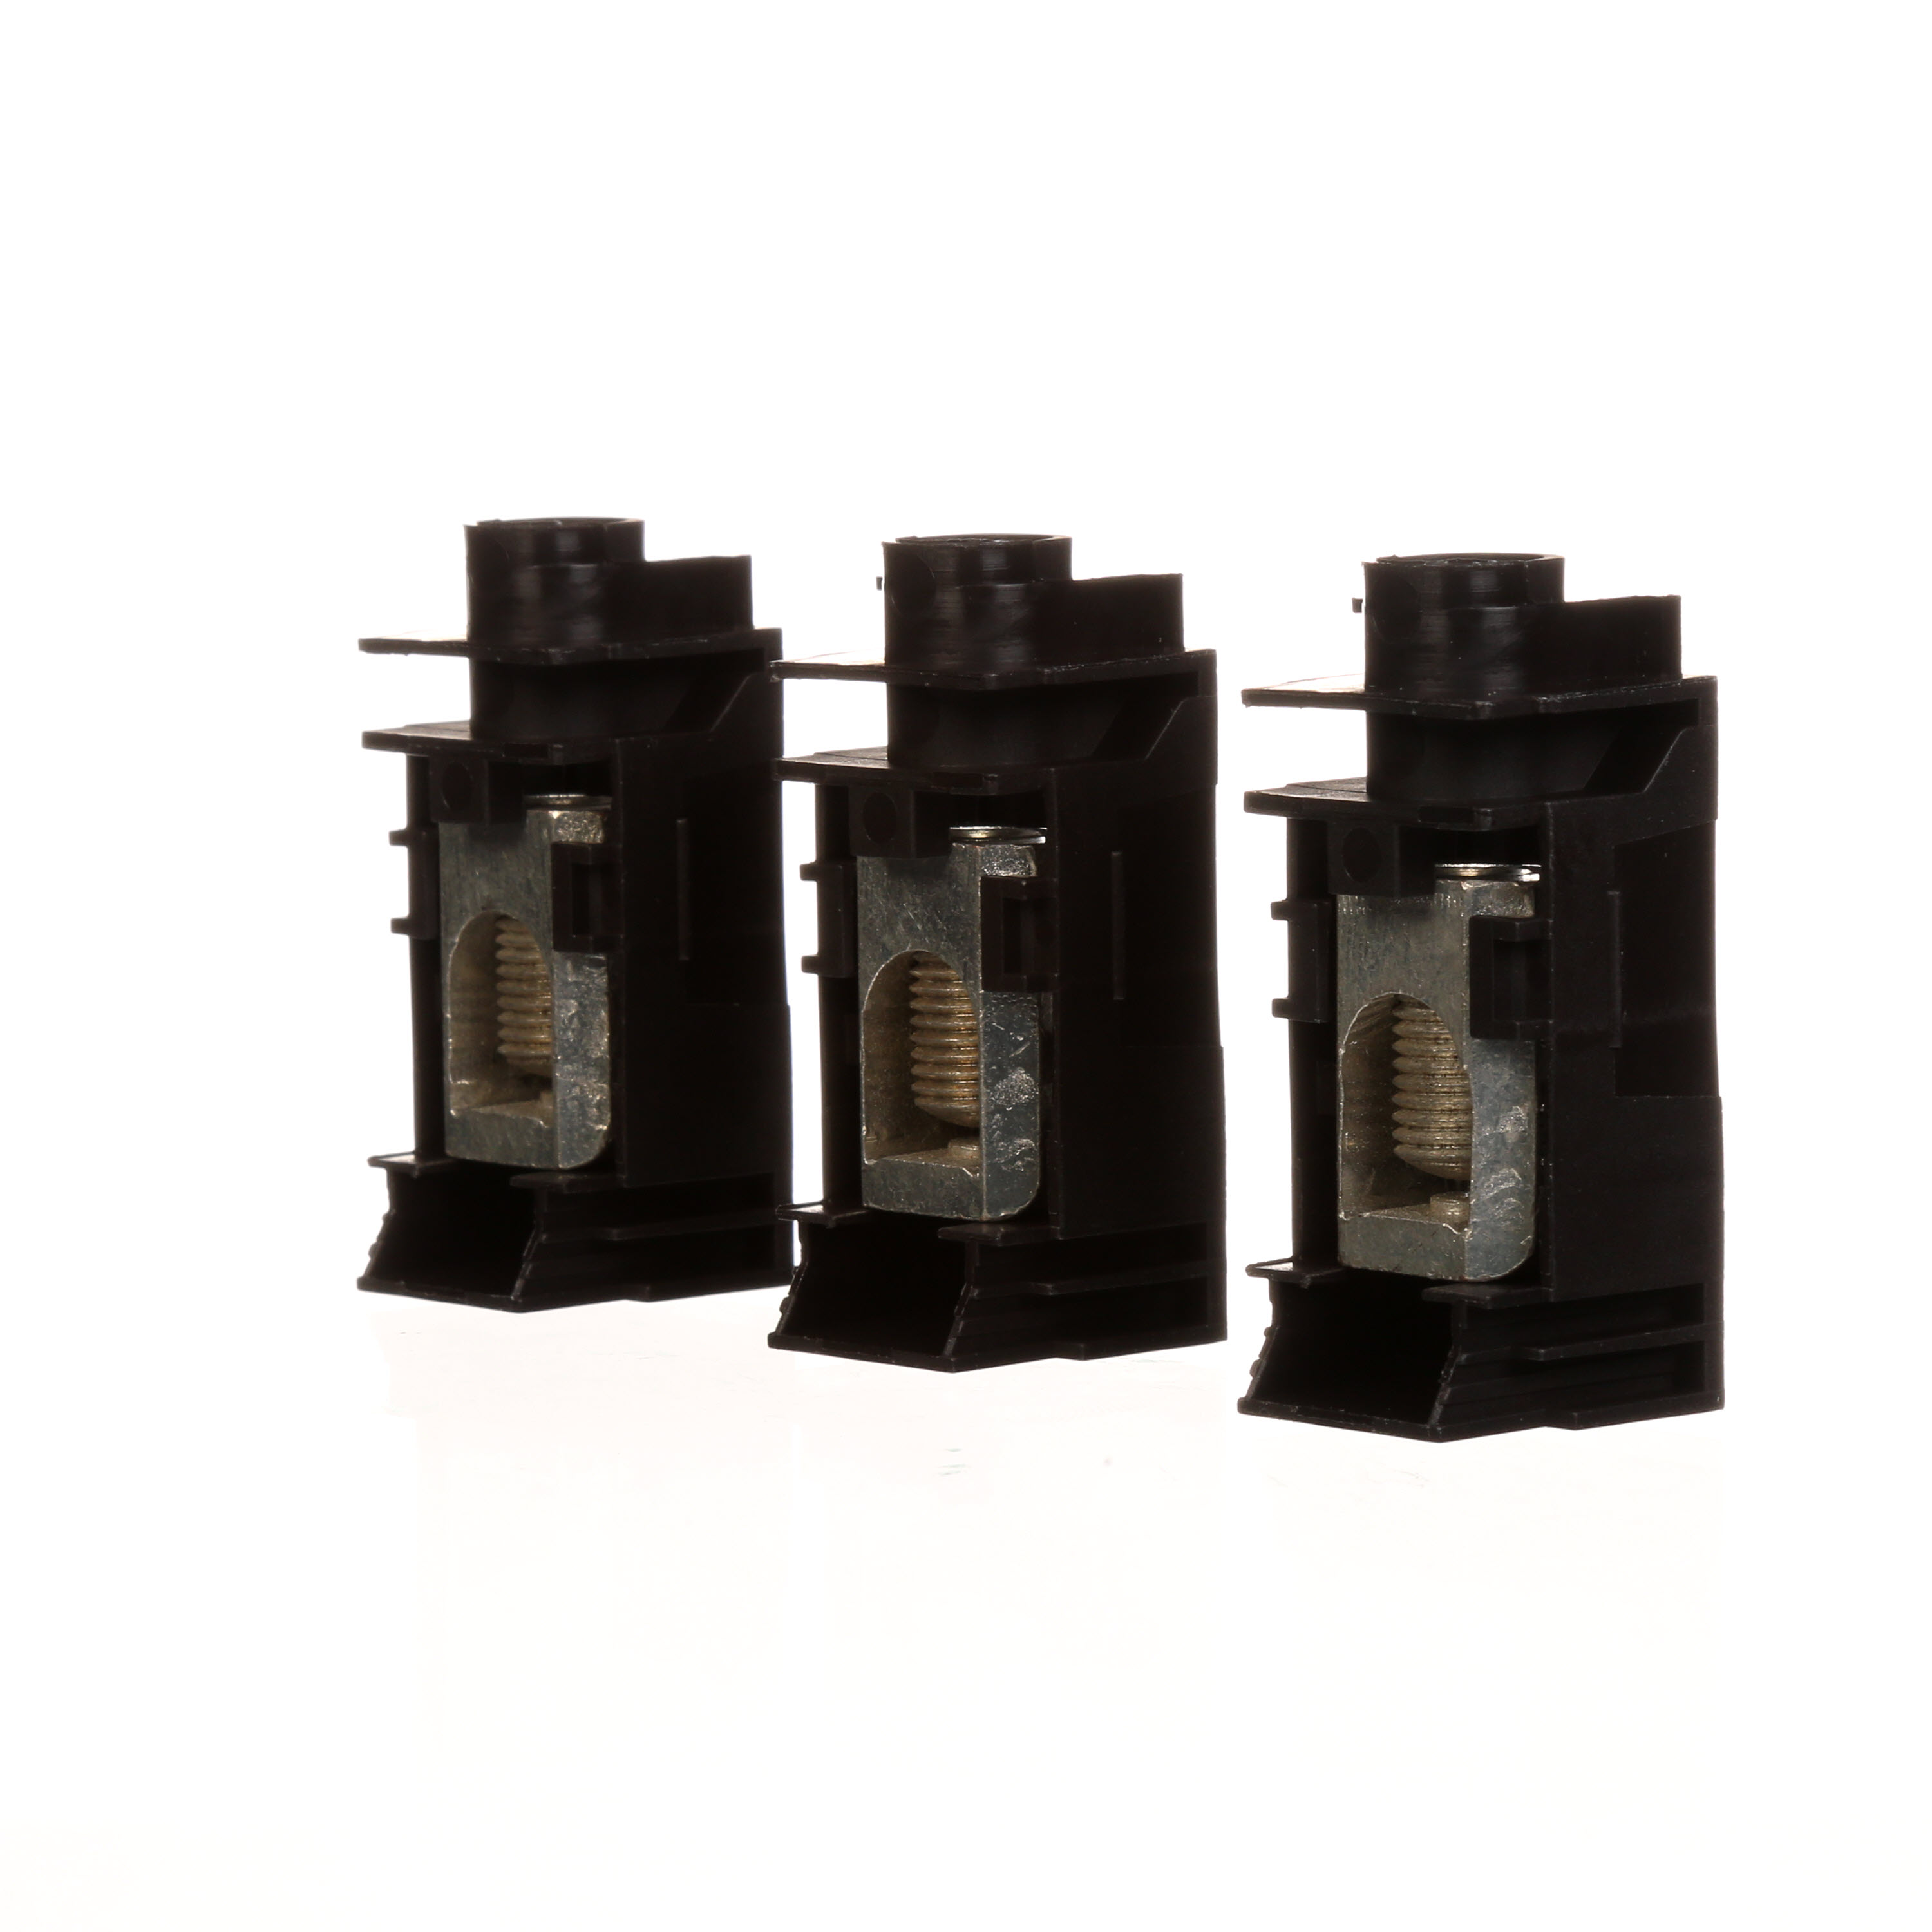 SIEMENS VL UL RATED CIRCUIT BREAKER ACCESSORY. 3 PIECE COPPER BODY LUG FOR 30A - 150A DG FRAME BREAKER. WIRE RANGE 6 - 3/0 AWS (CU ONLY)- 1 BARREL LUG. SUITABLE FOR LINE AND LOAD SIDES. REQUIRED FOR 100 PERCENT RATED BREAKERS.